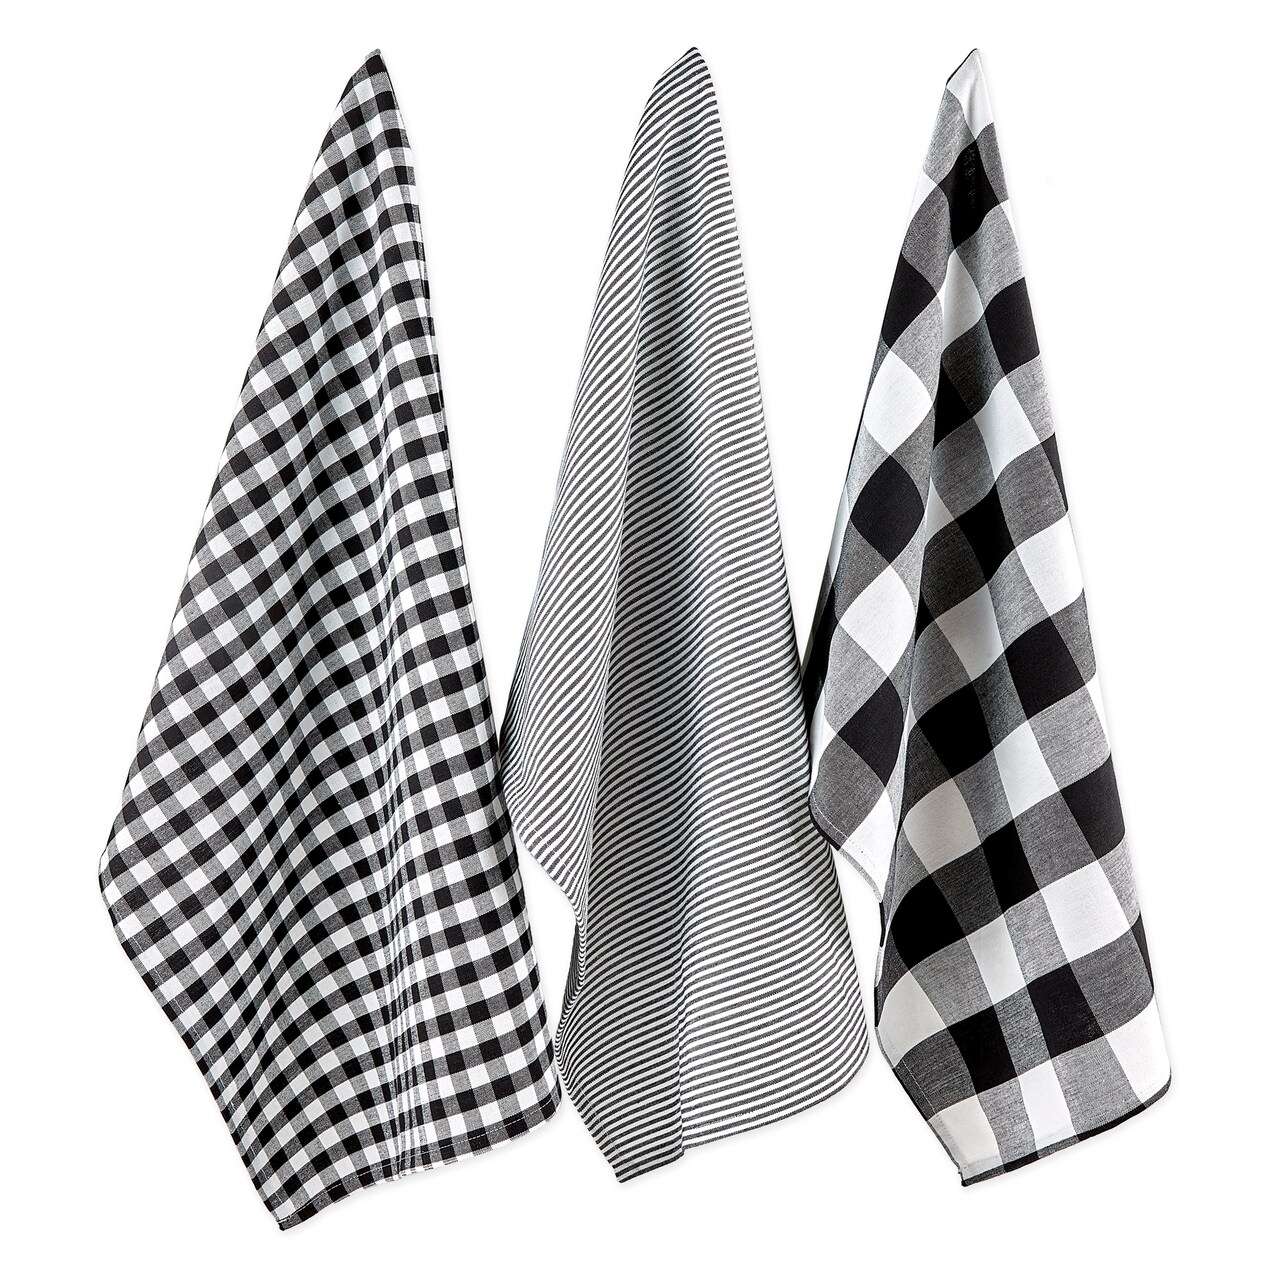 Contemporary Home Living Set of 3 Assorted Black and White Dish Towel, 30